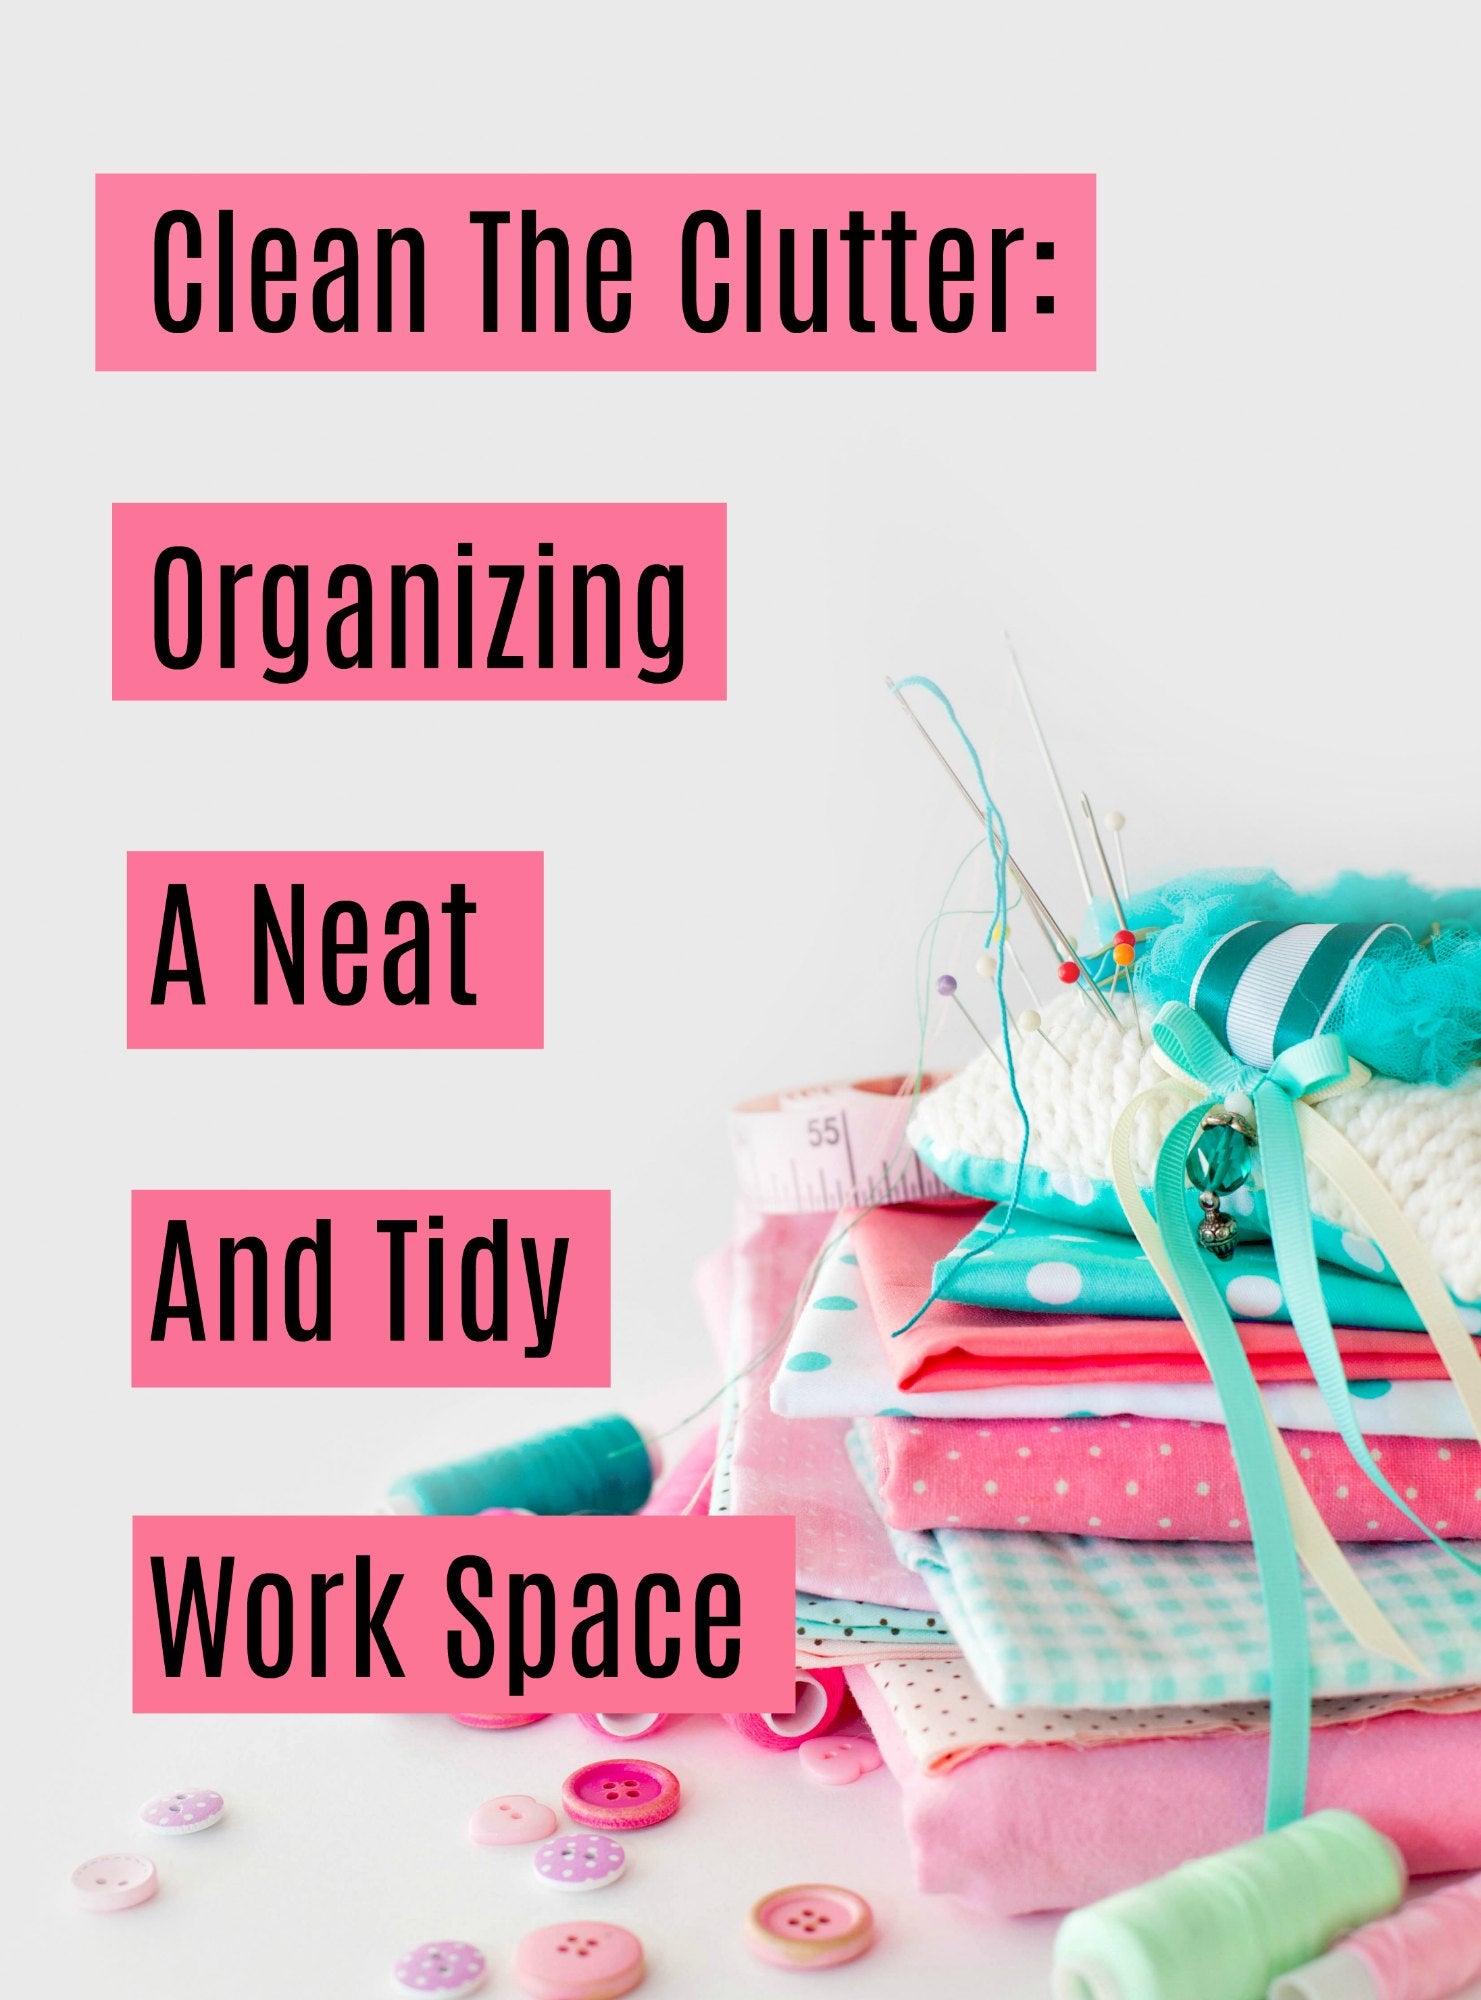 Clean the Clutter: Organizing a Neat and Tidy Work Space